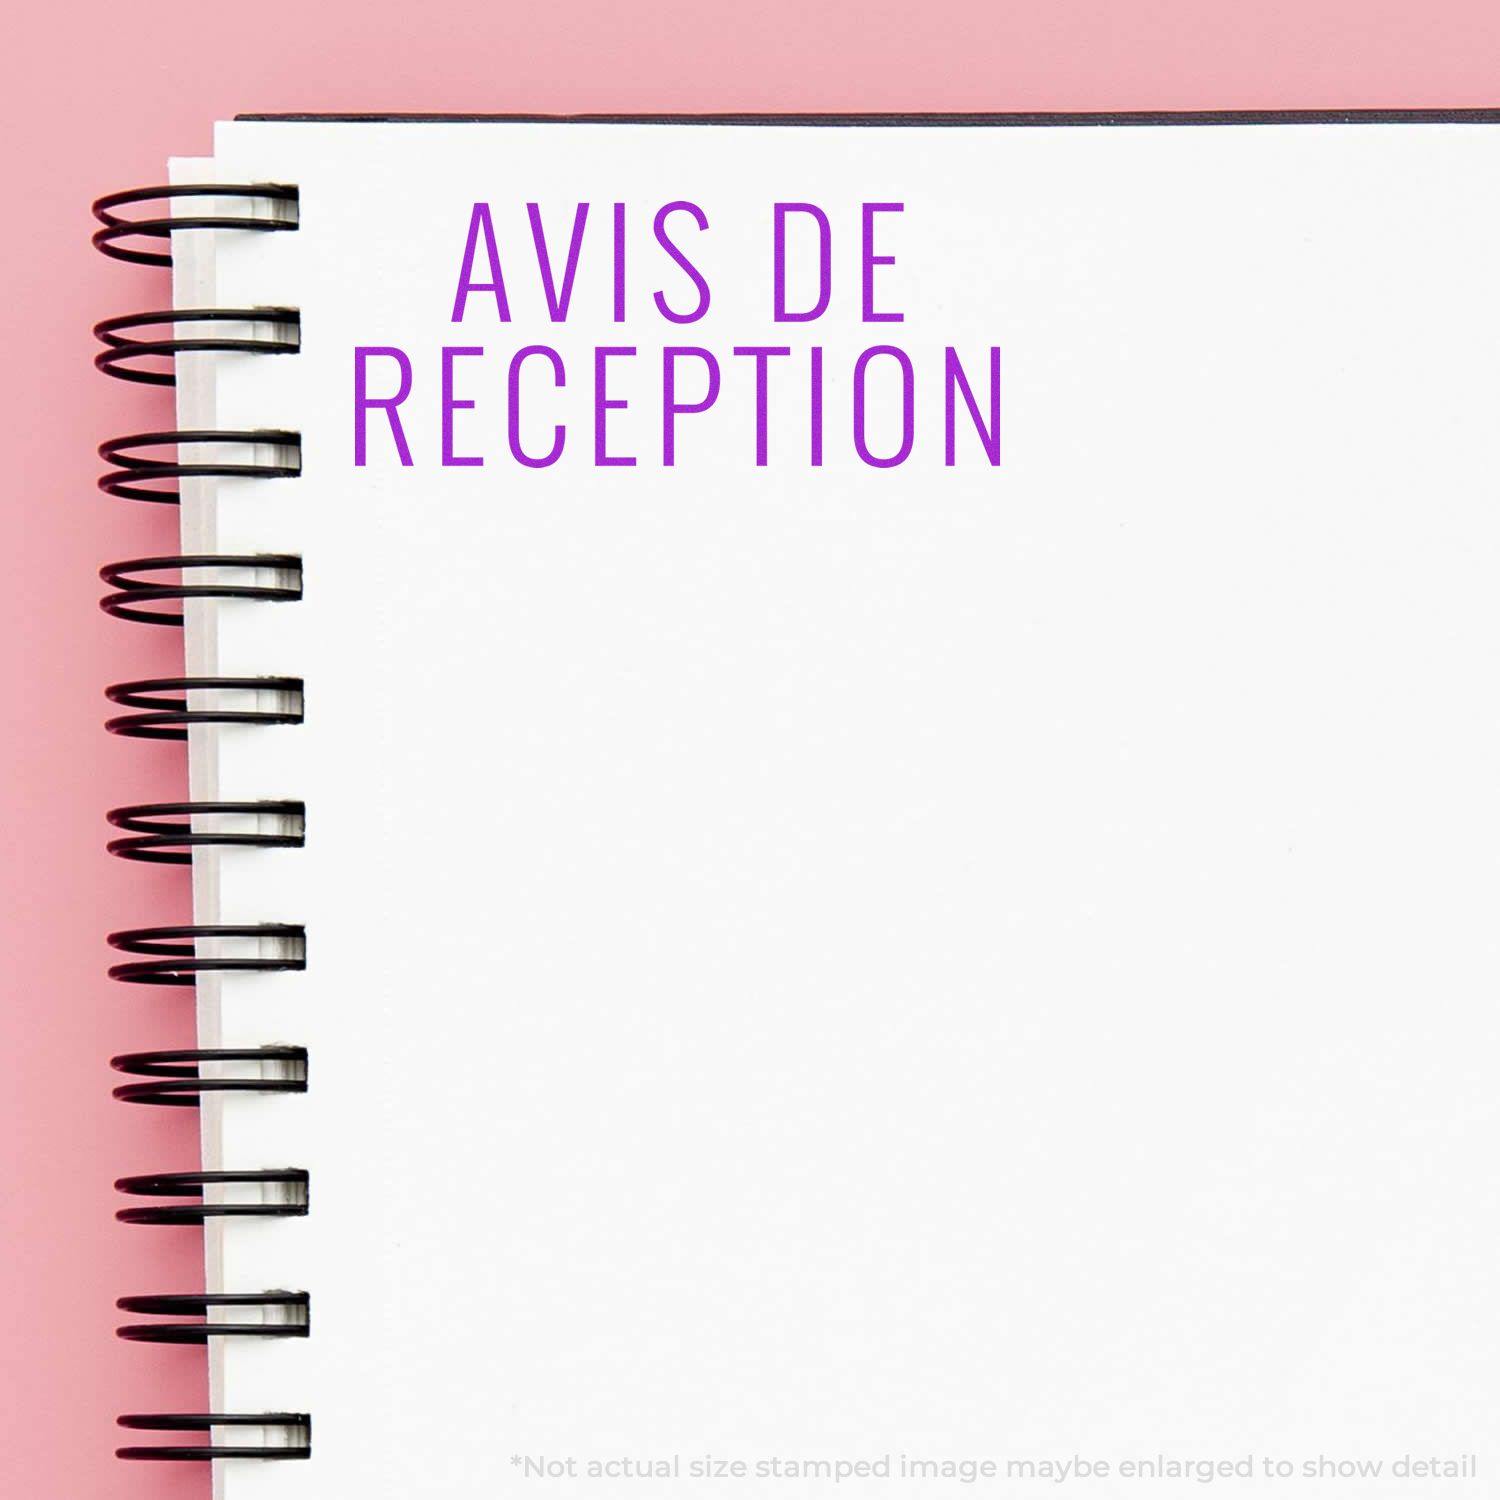 A self-inking stamp with a stamped image showing how the text "AVIS DE RECEPTION" is displayed after stamping.